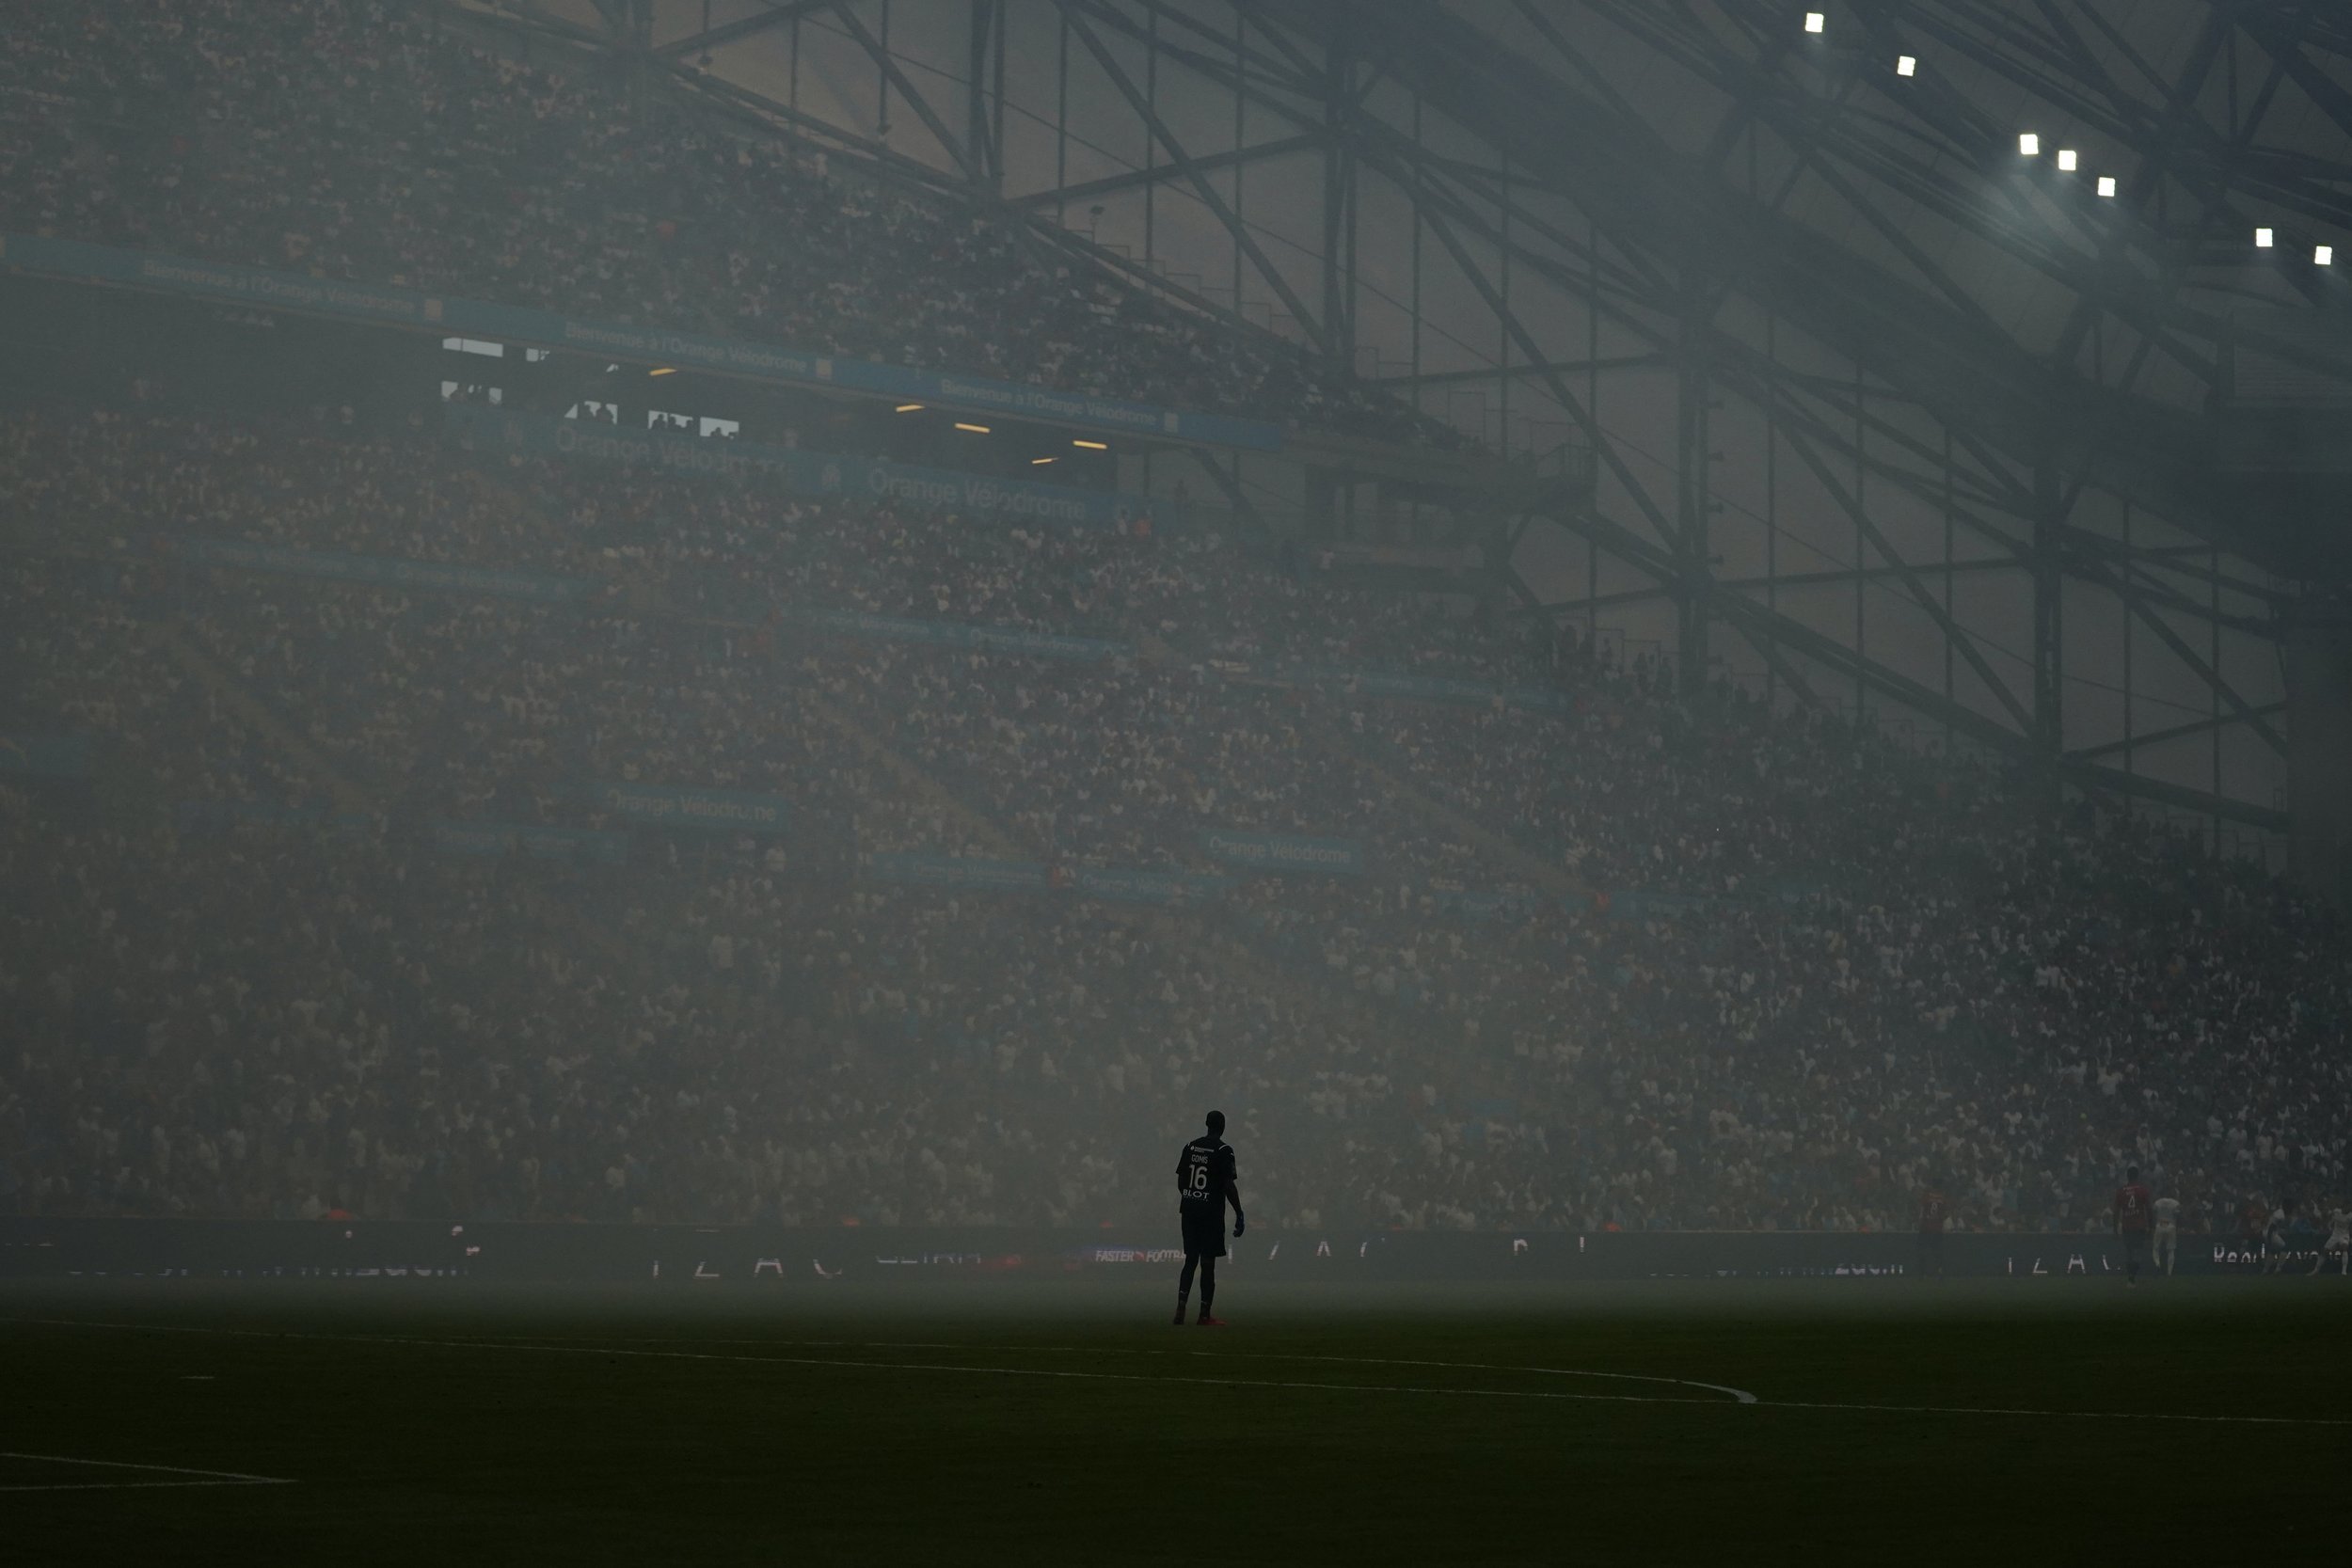  Rennes' goalkeeper Alfred Gomis stands in heavy fog caused by flares after Marseille's Amine Harit scores his side's second goal during a French League One soccer match at the Velodrome stadium in Marseille, France, on Sept. 19, 2021. (AP Photo/Dani